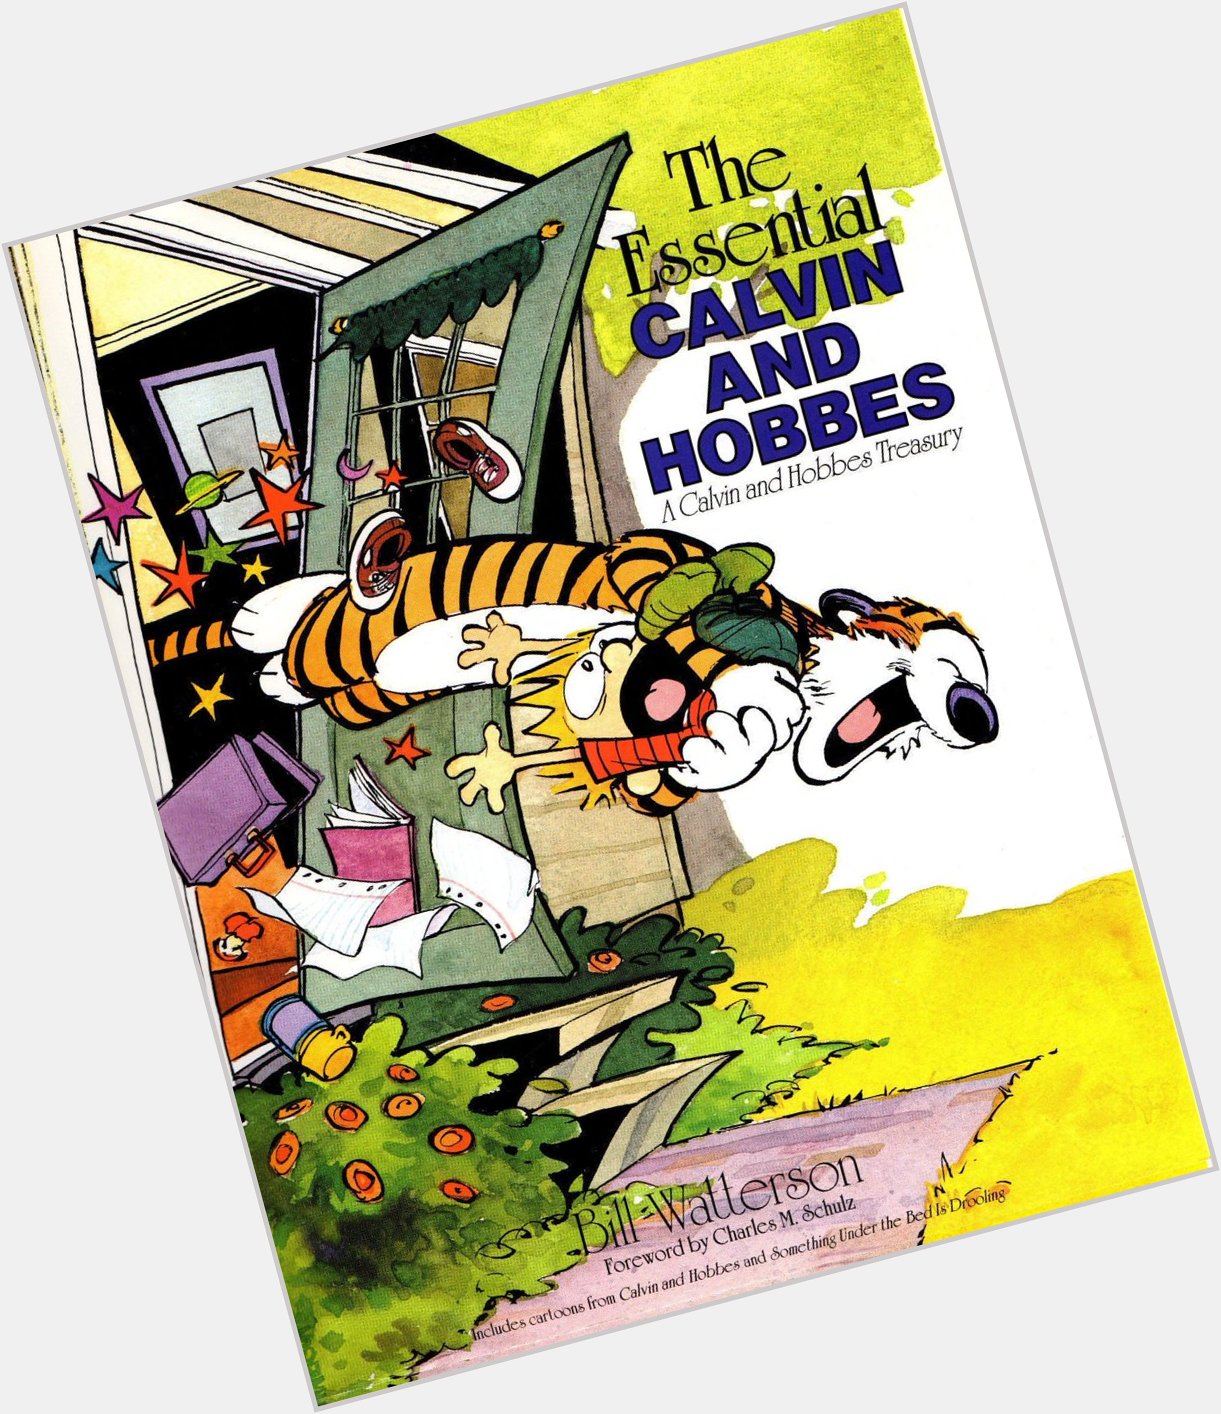 Happy birthday to comics genius Bill Watterson - THE ESSENTIAL CALVIN AND HOBBES 